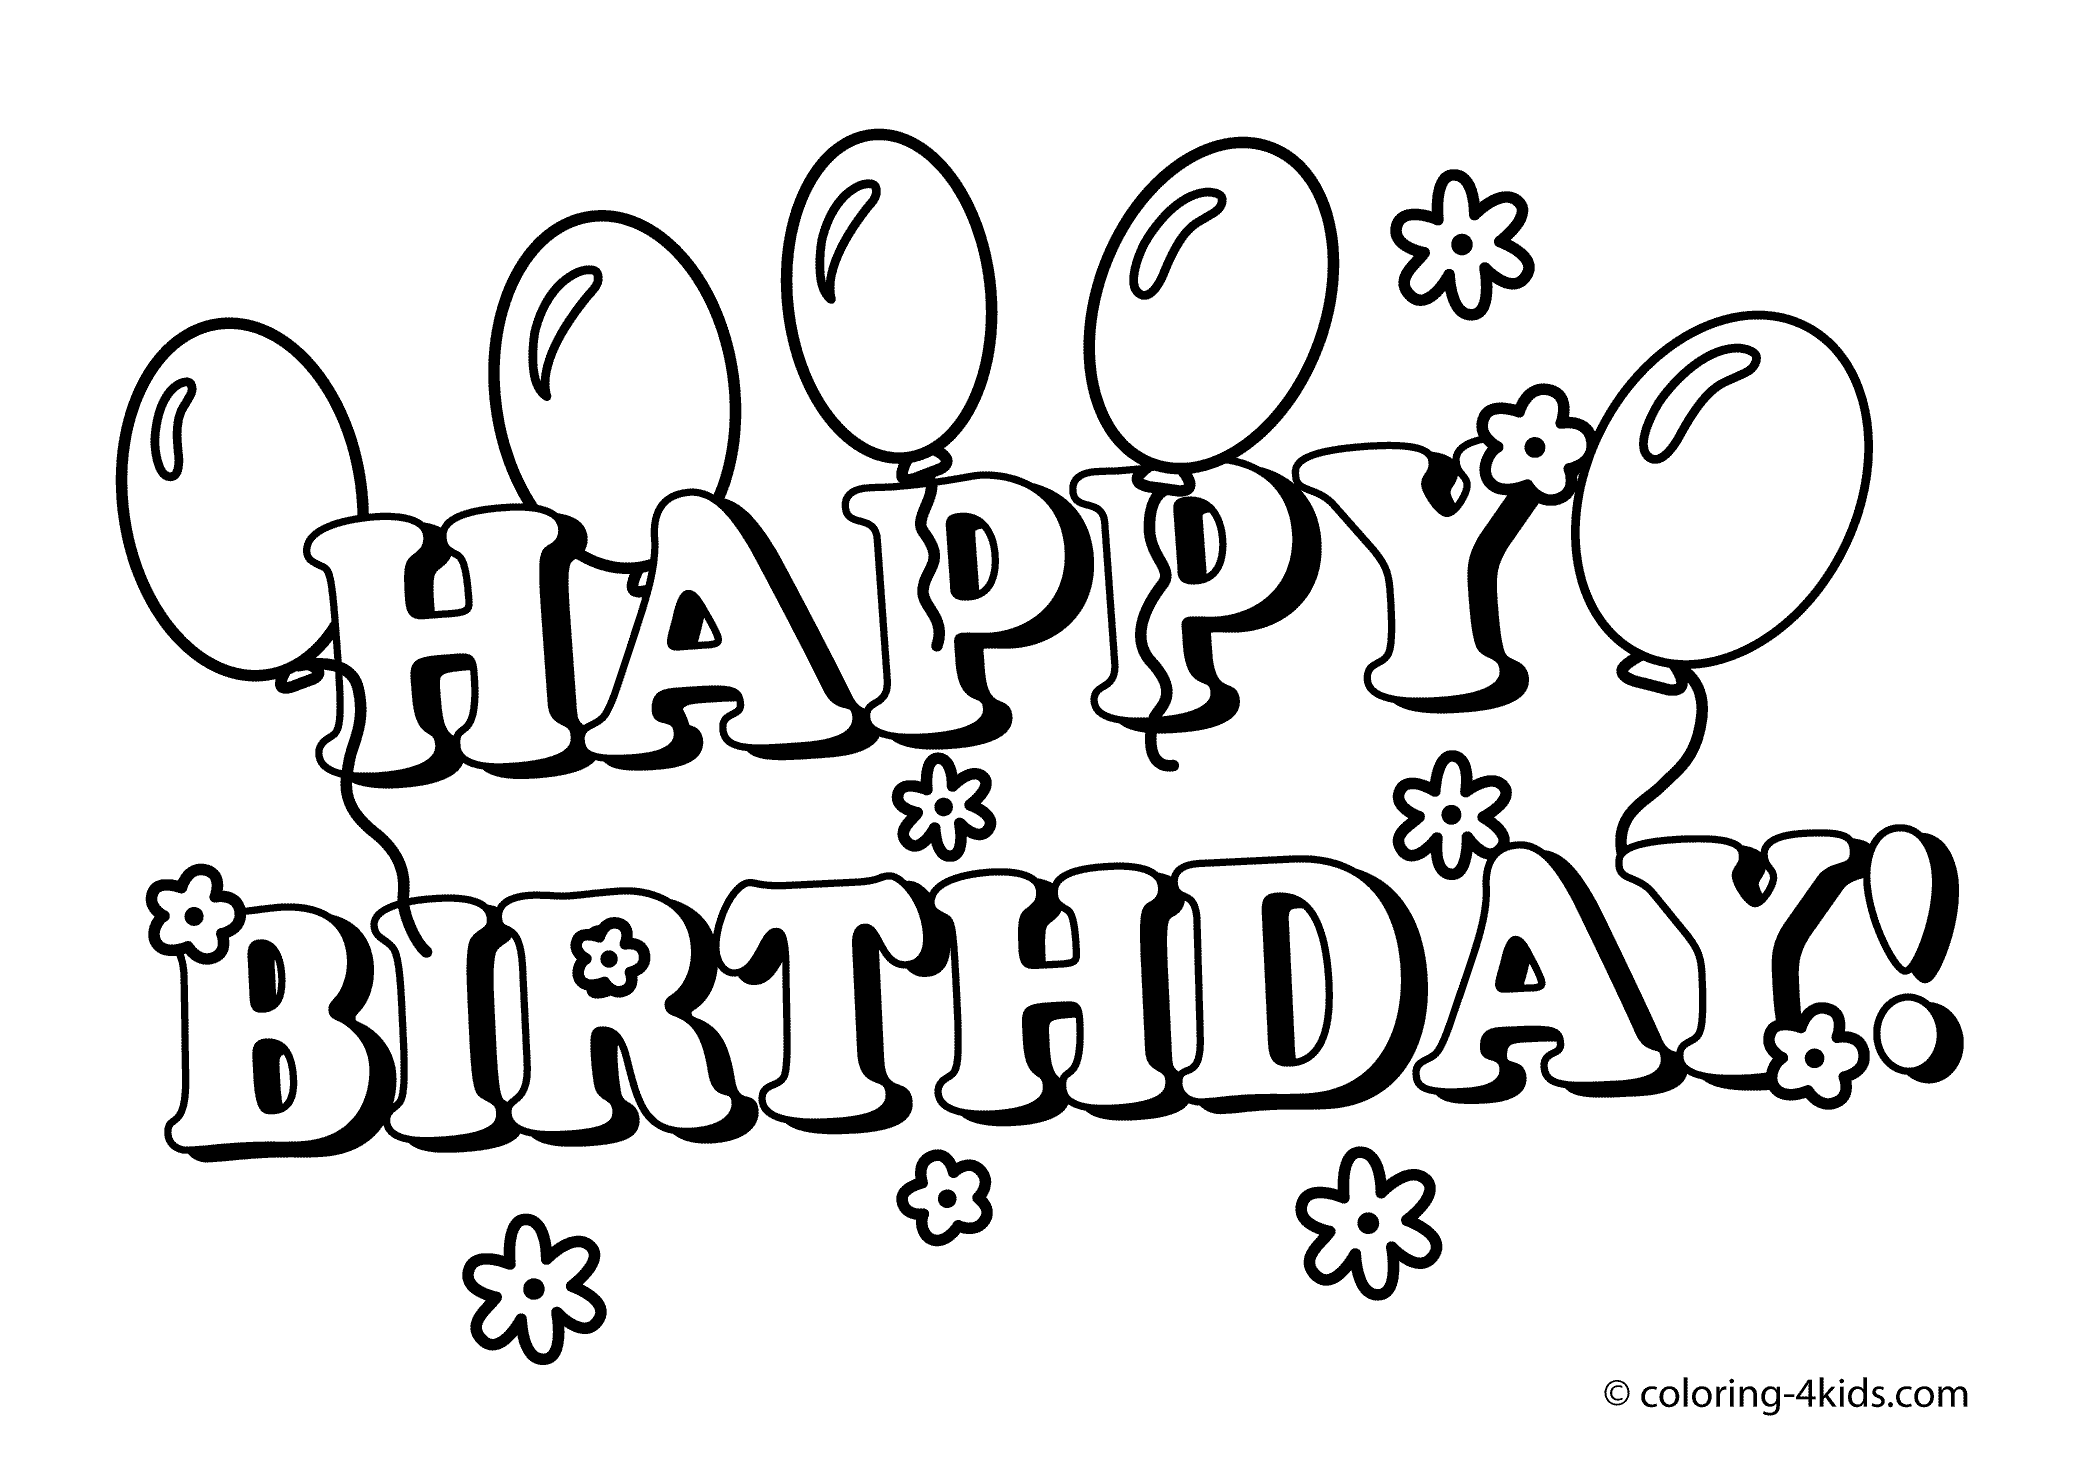 Happy birthday black and white clipart for guys - Clipartix